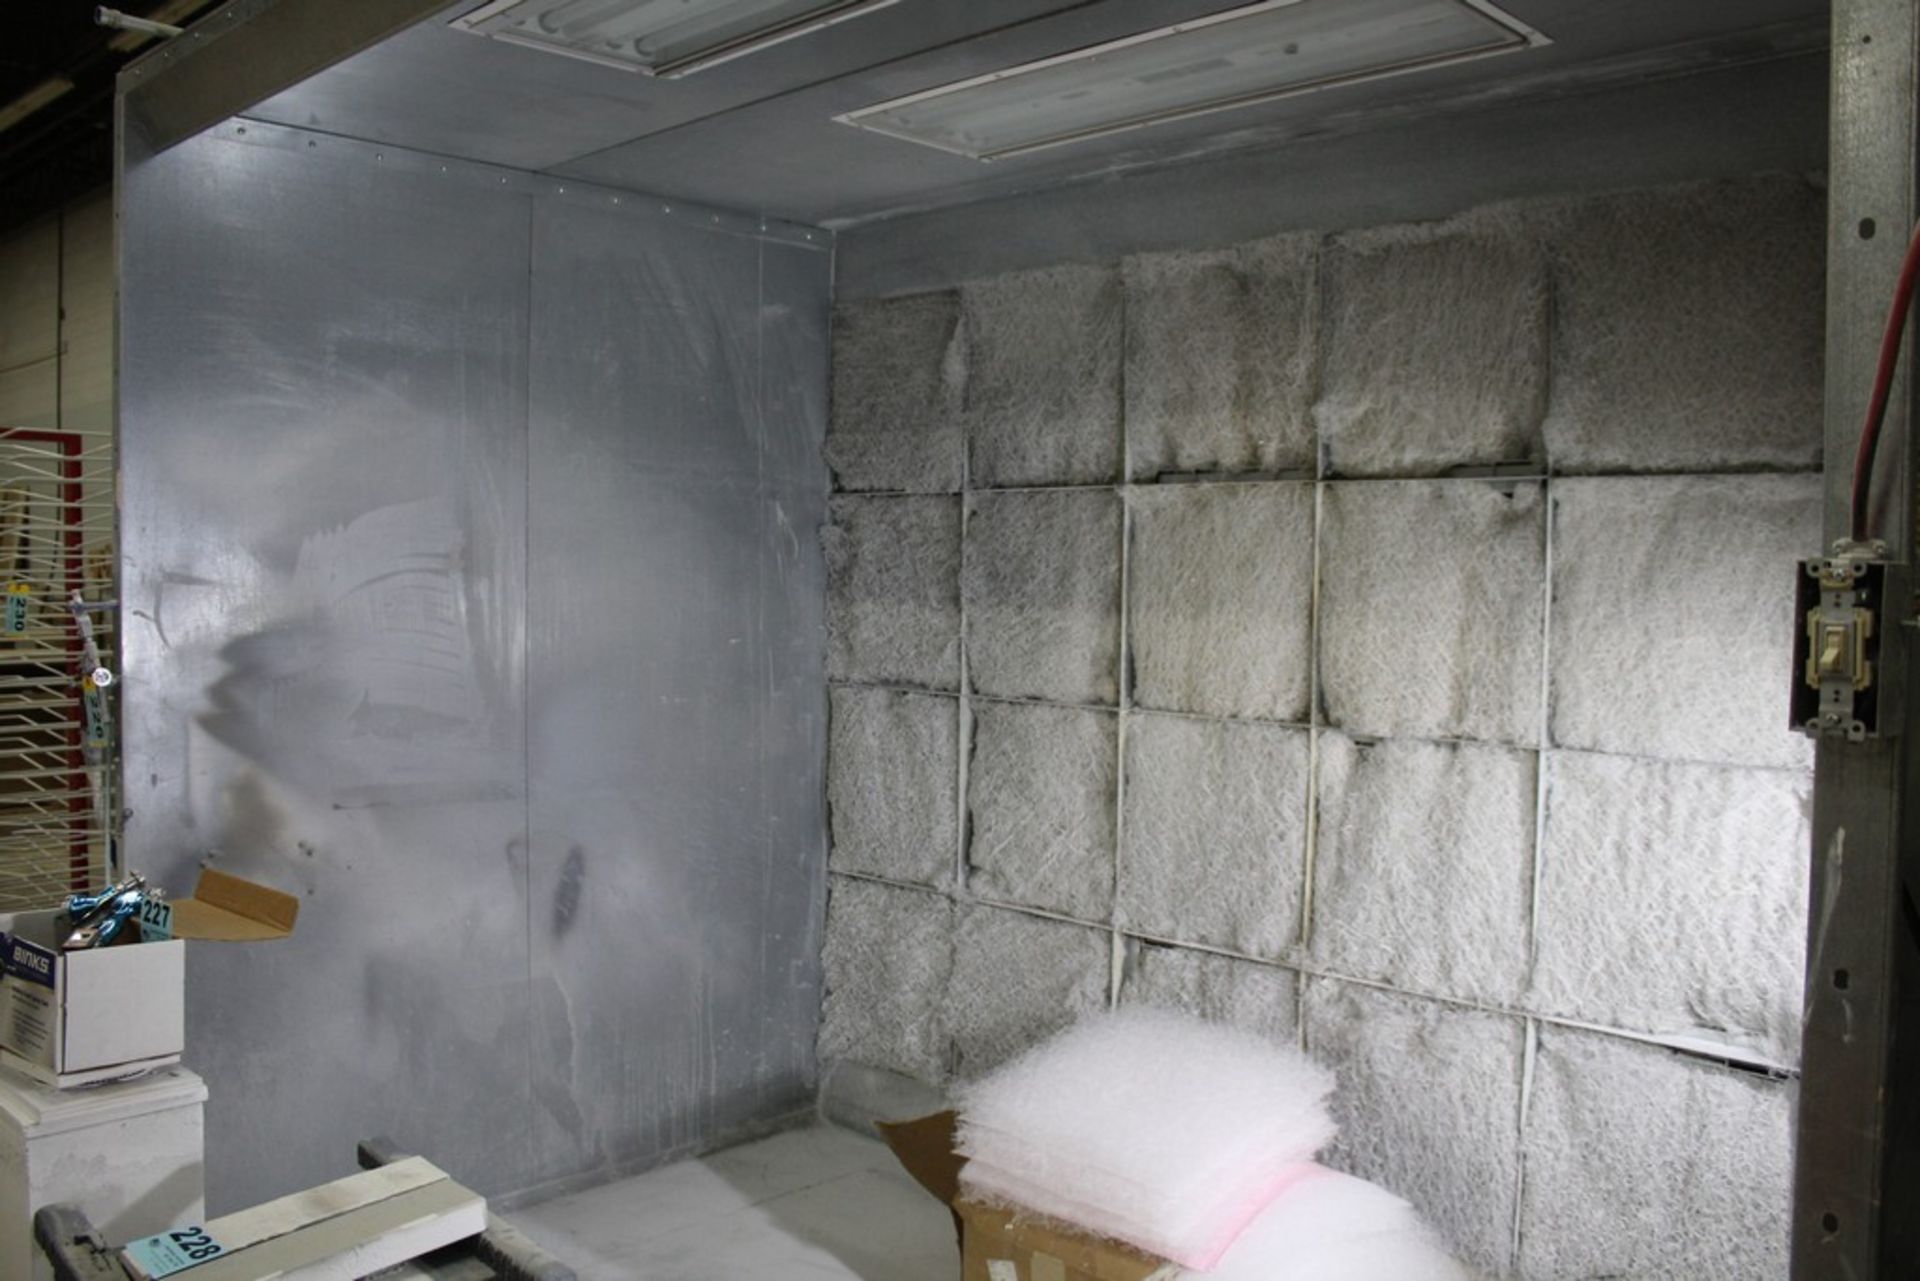 PAASCHE PAINT SPRAY BOOTH 10' W X 6' D X 8' H WITH CA TECHBOLOGIES SPRAY GUN SYSTEM AND EXTRA - Image 8 of 11